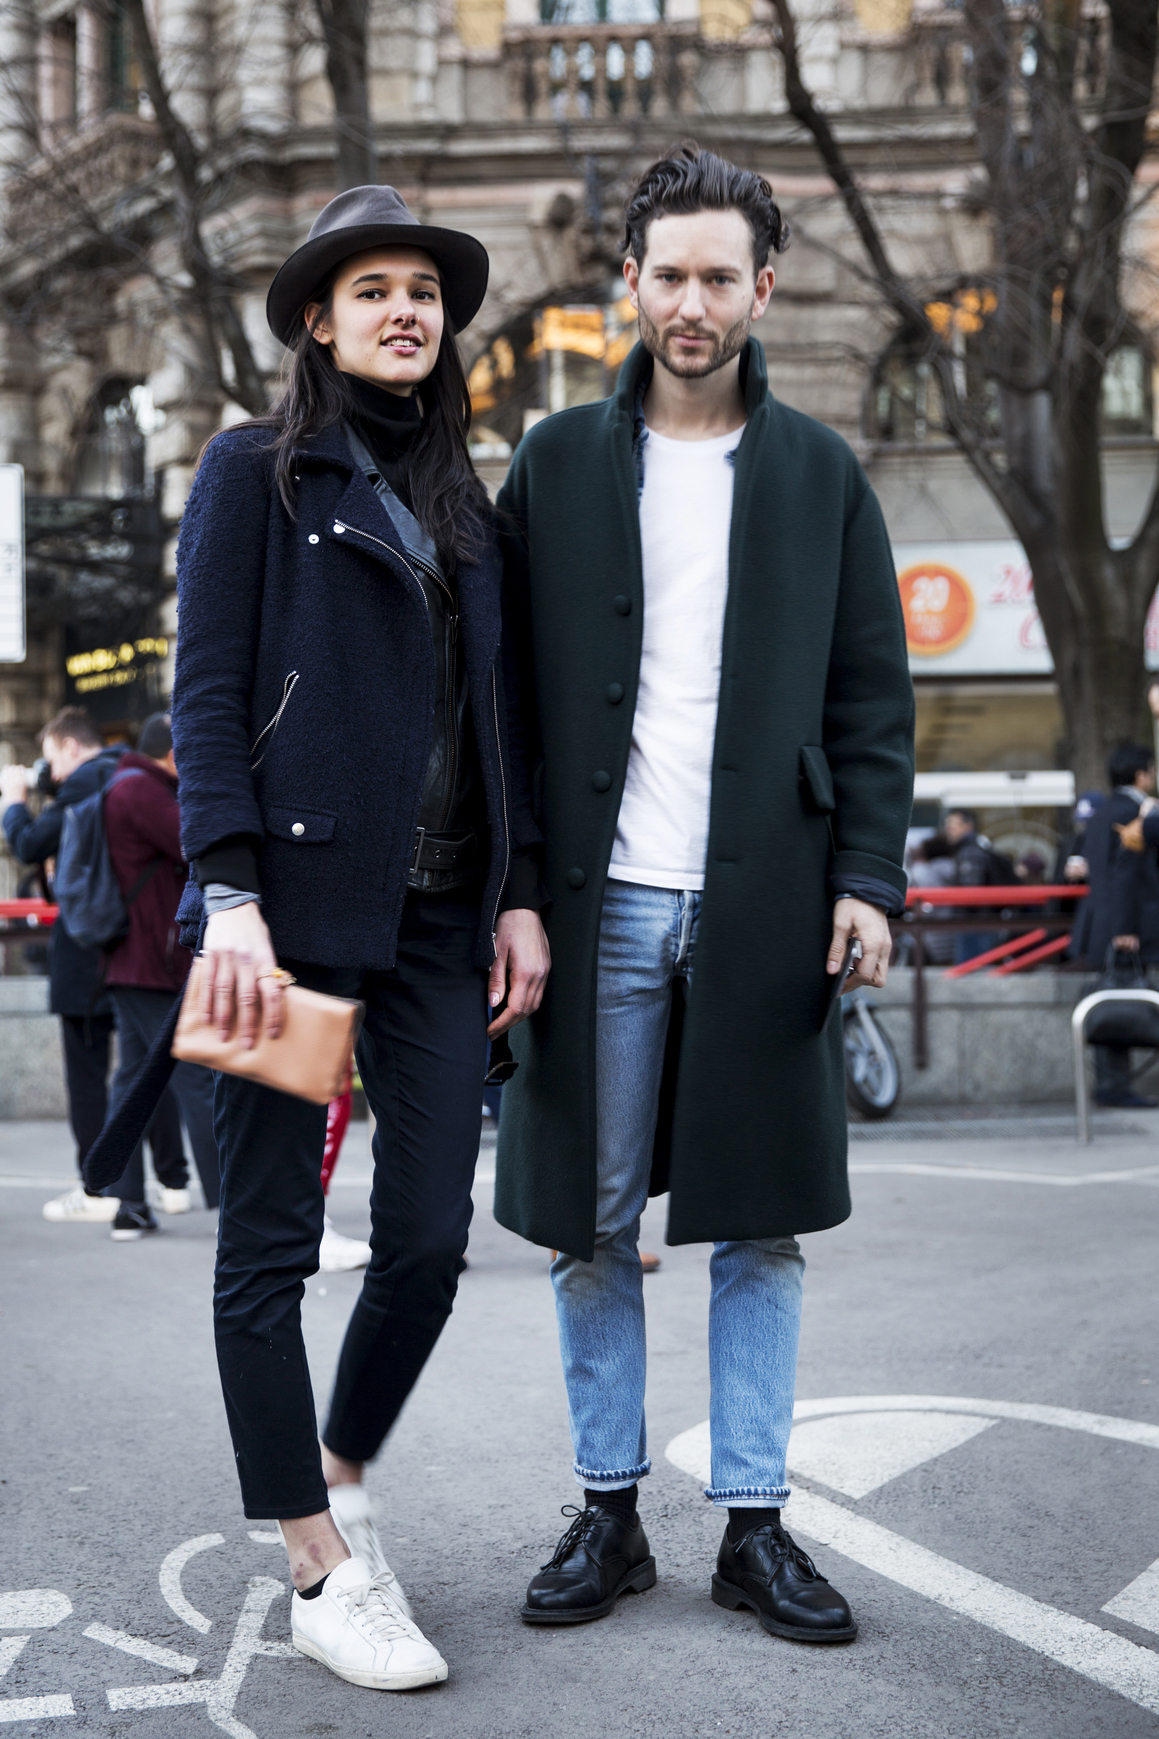 Street Fashion - Cool and Cosy